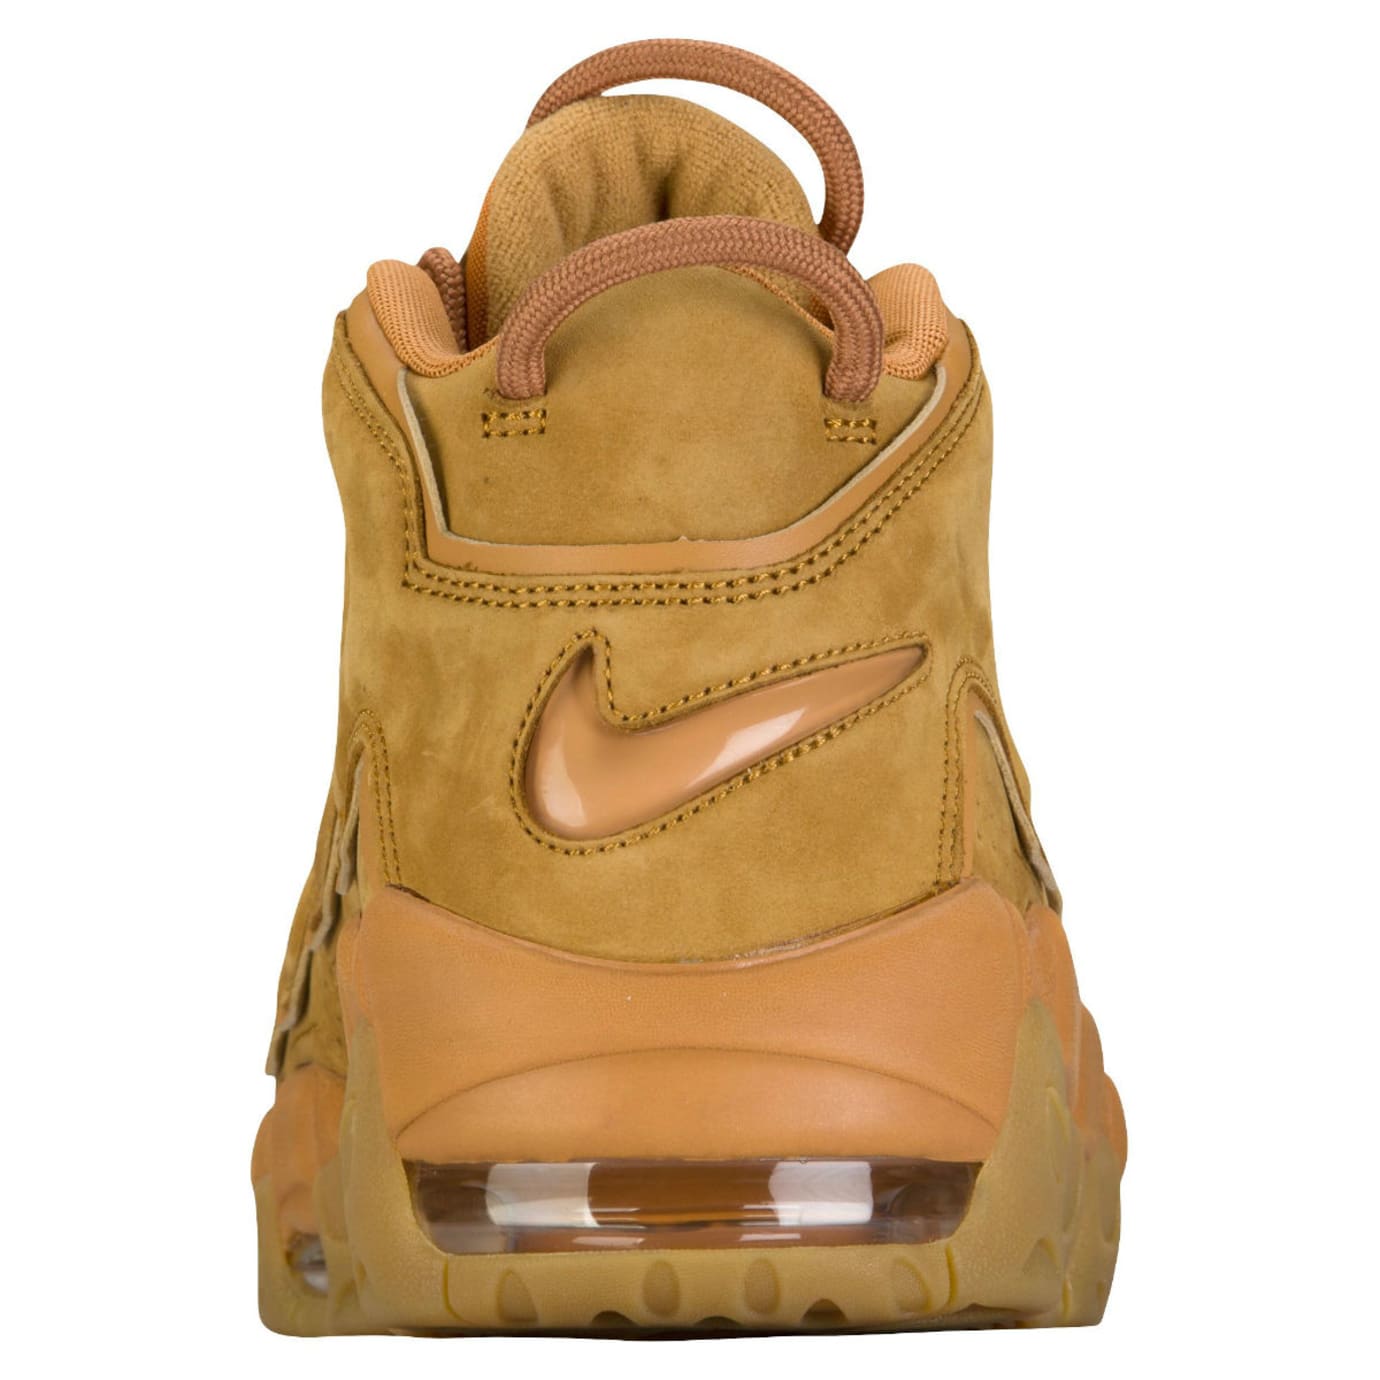 nike air more uptempo wheat flax